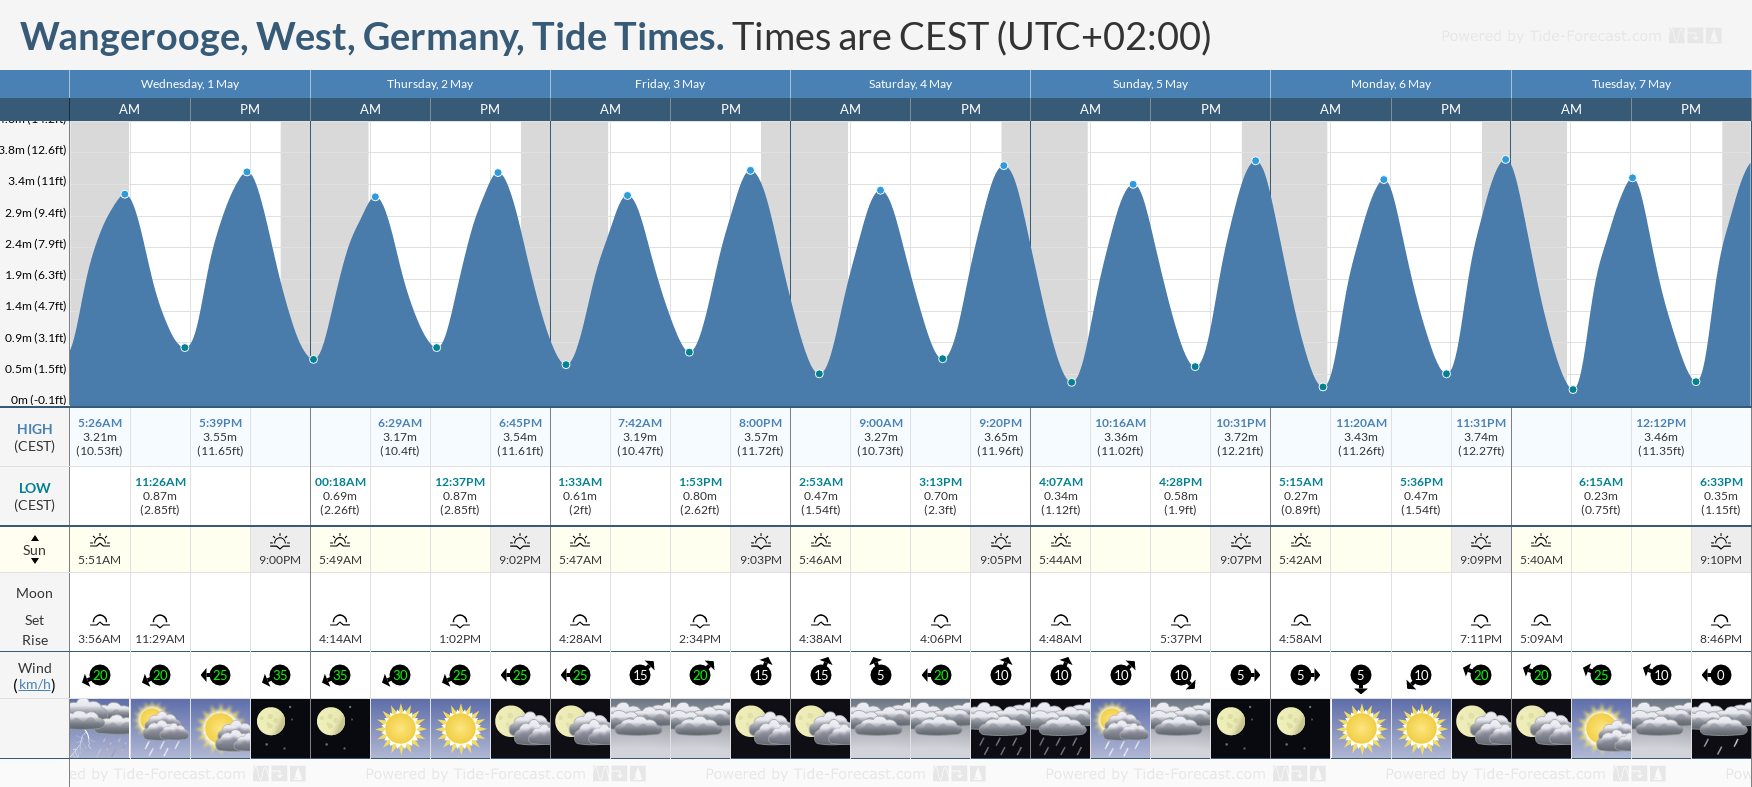 Wangerooge, West, Germany Tide Chart including high and low tide tide times for the next 7 days